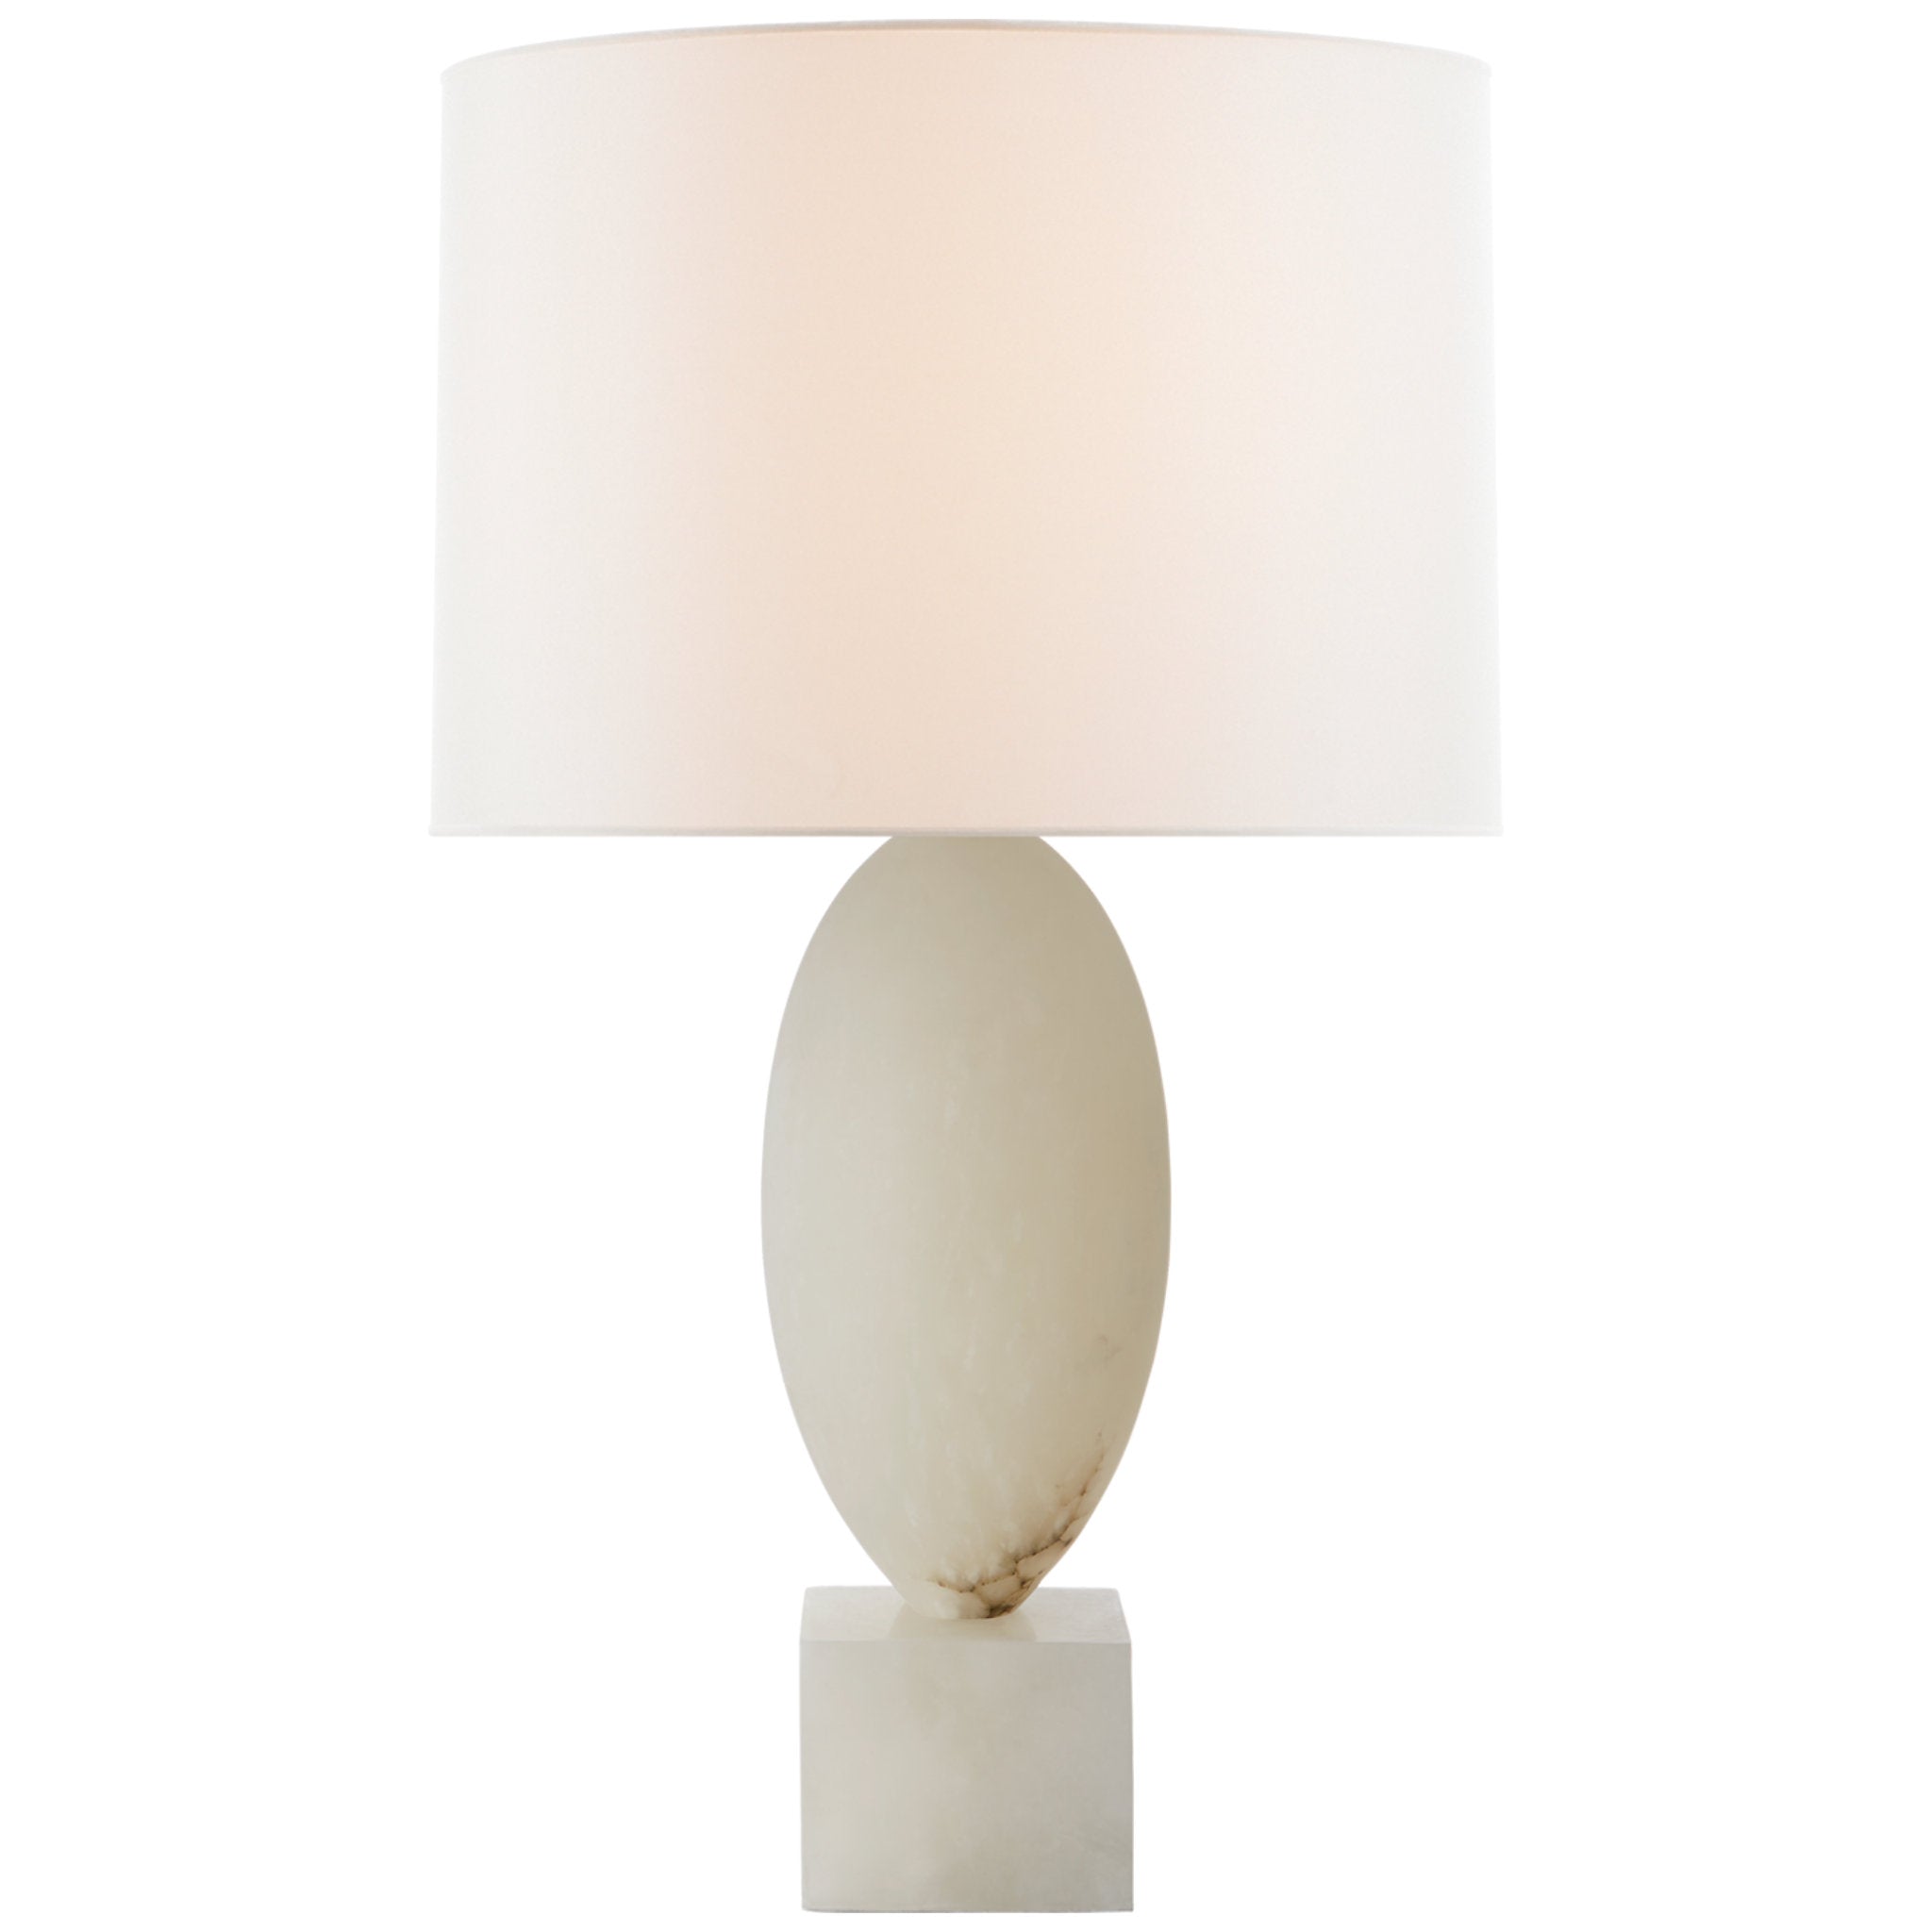 Julie Neill Versa Large Table Lamp in Alabaster with Linen Shade